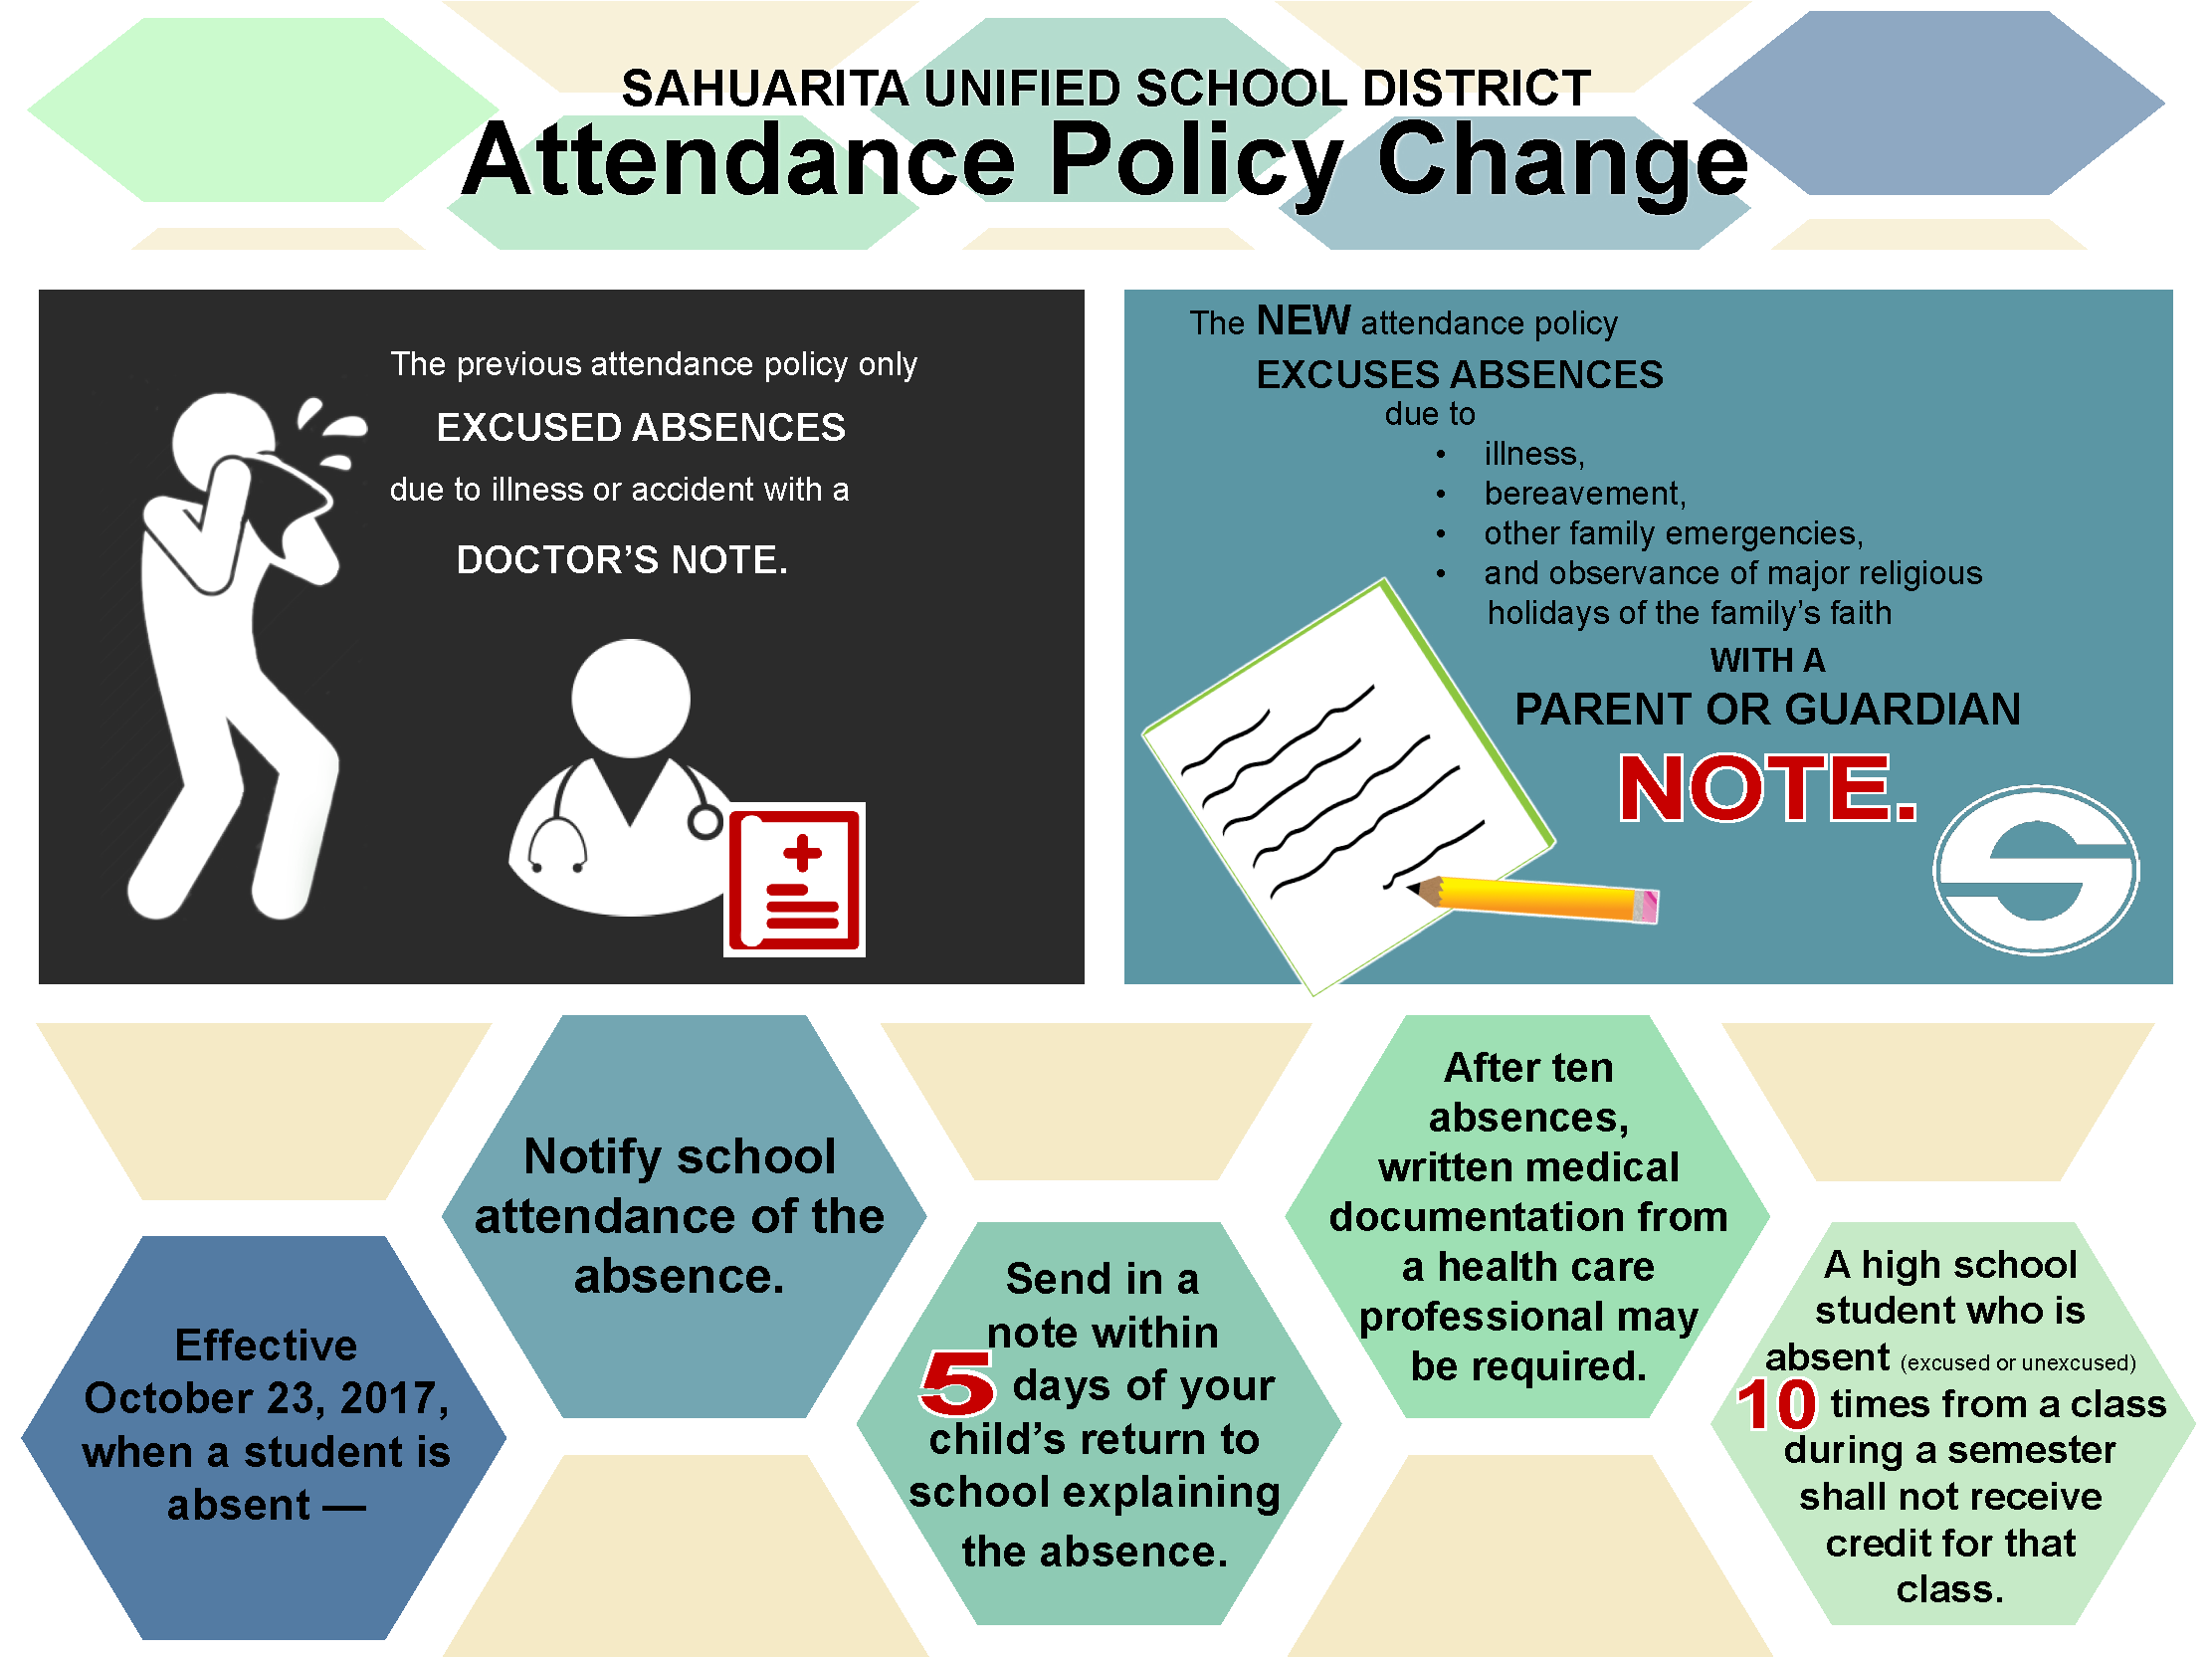 Sahuarita Unified School District Attendance Policy Change — Effective October 23, 2017